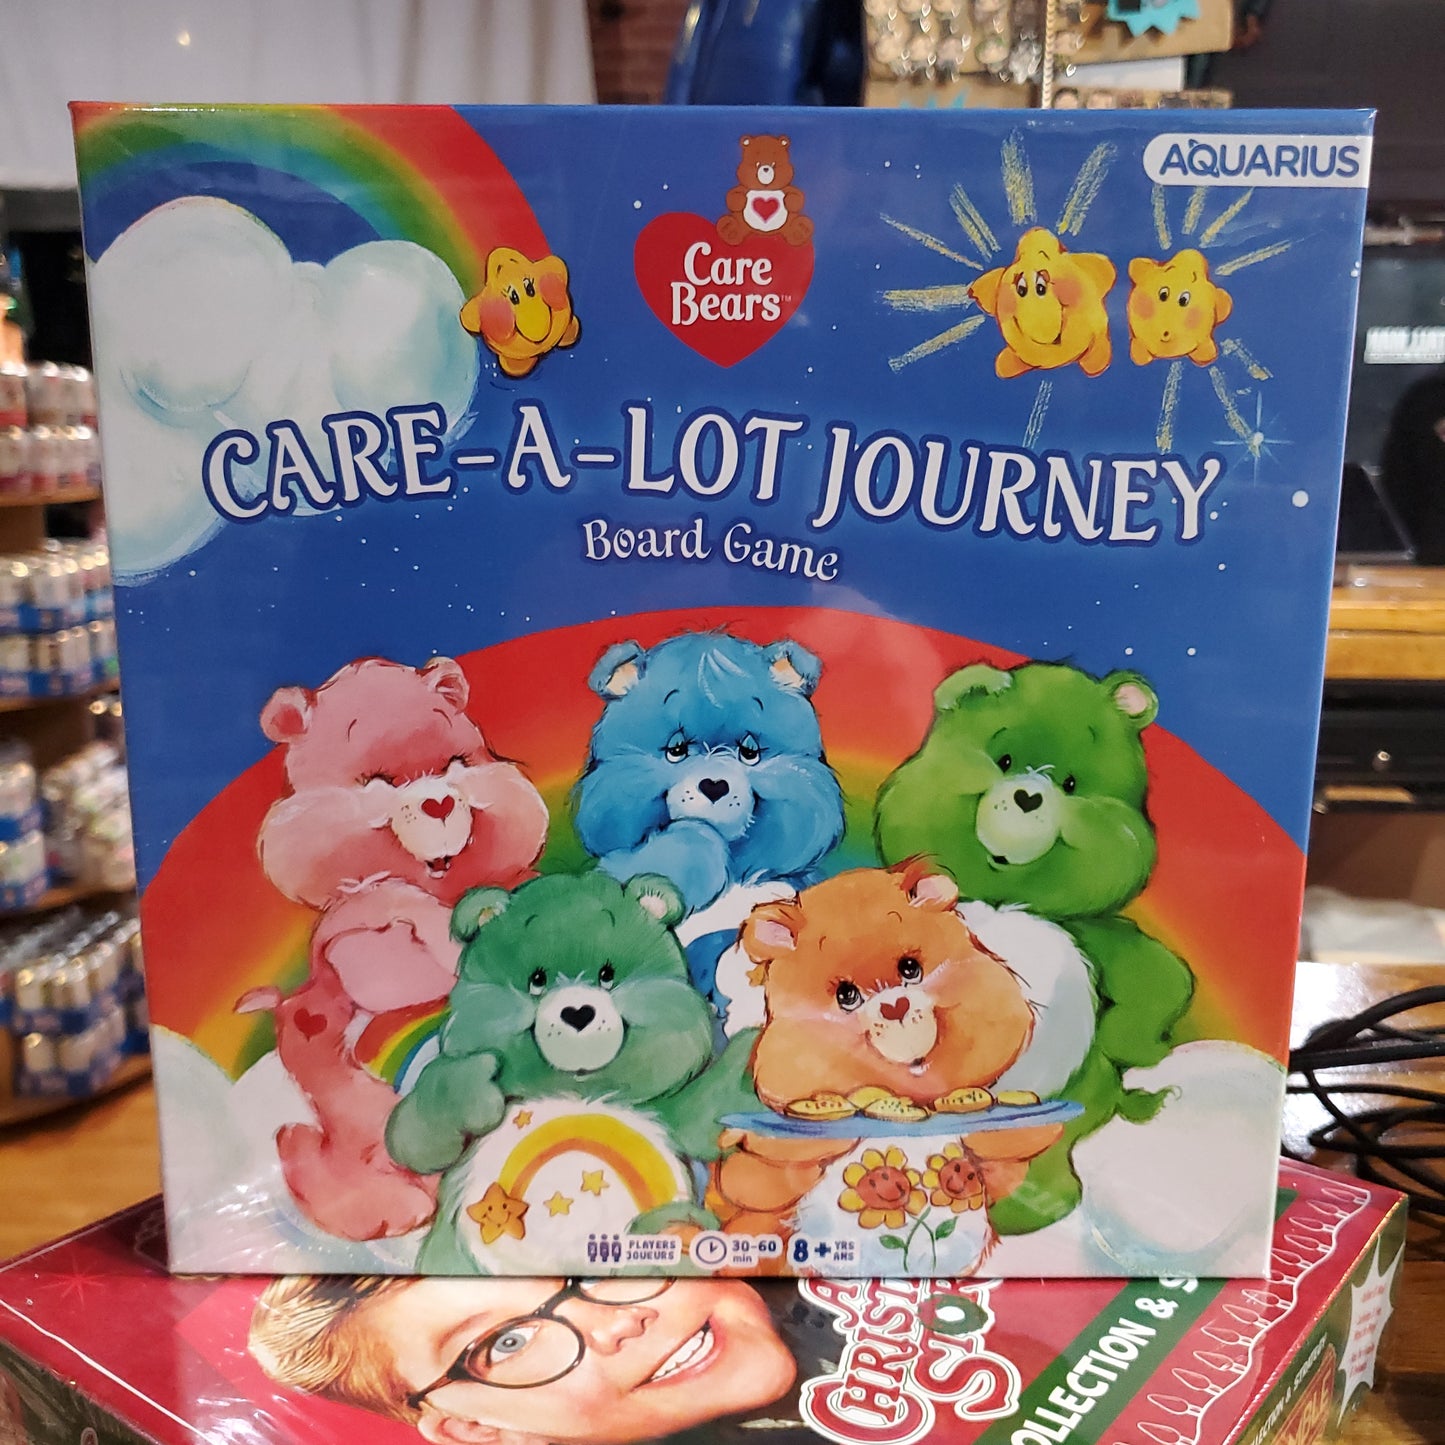 Care-A-Lot Journey Board Game